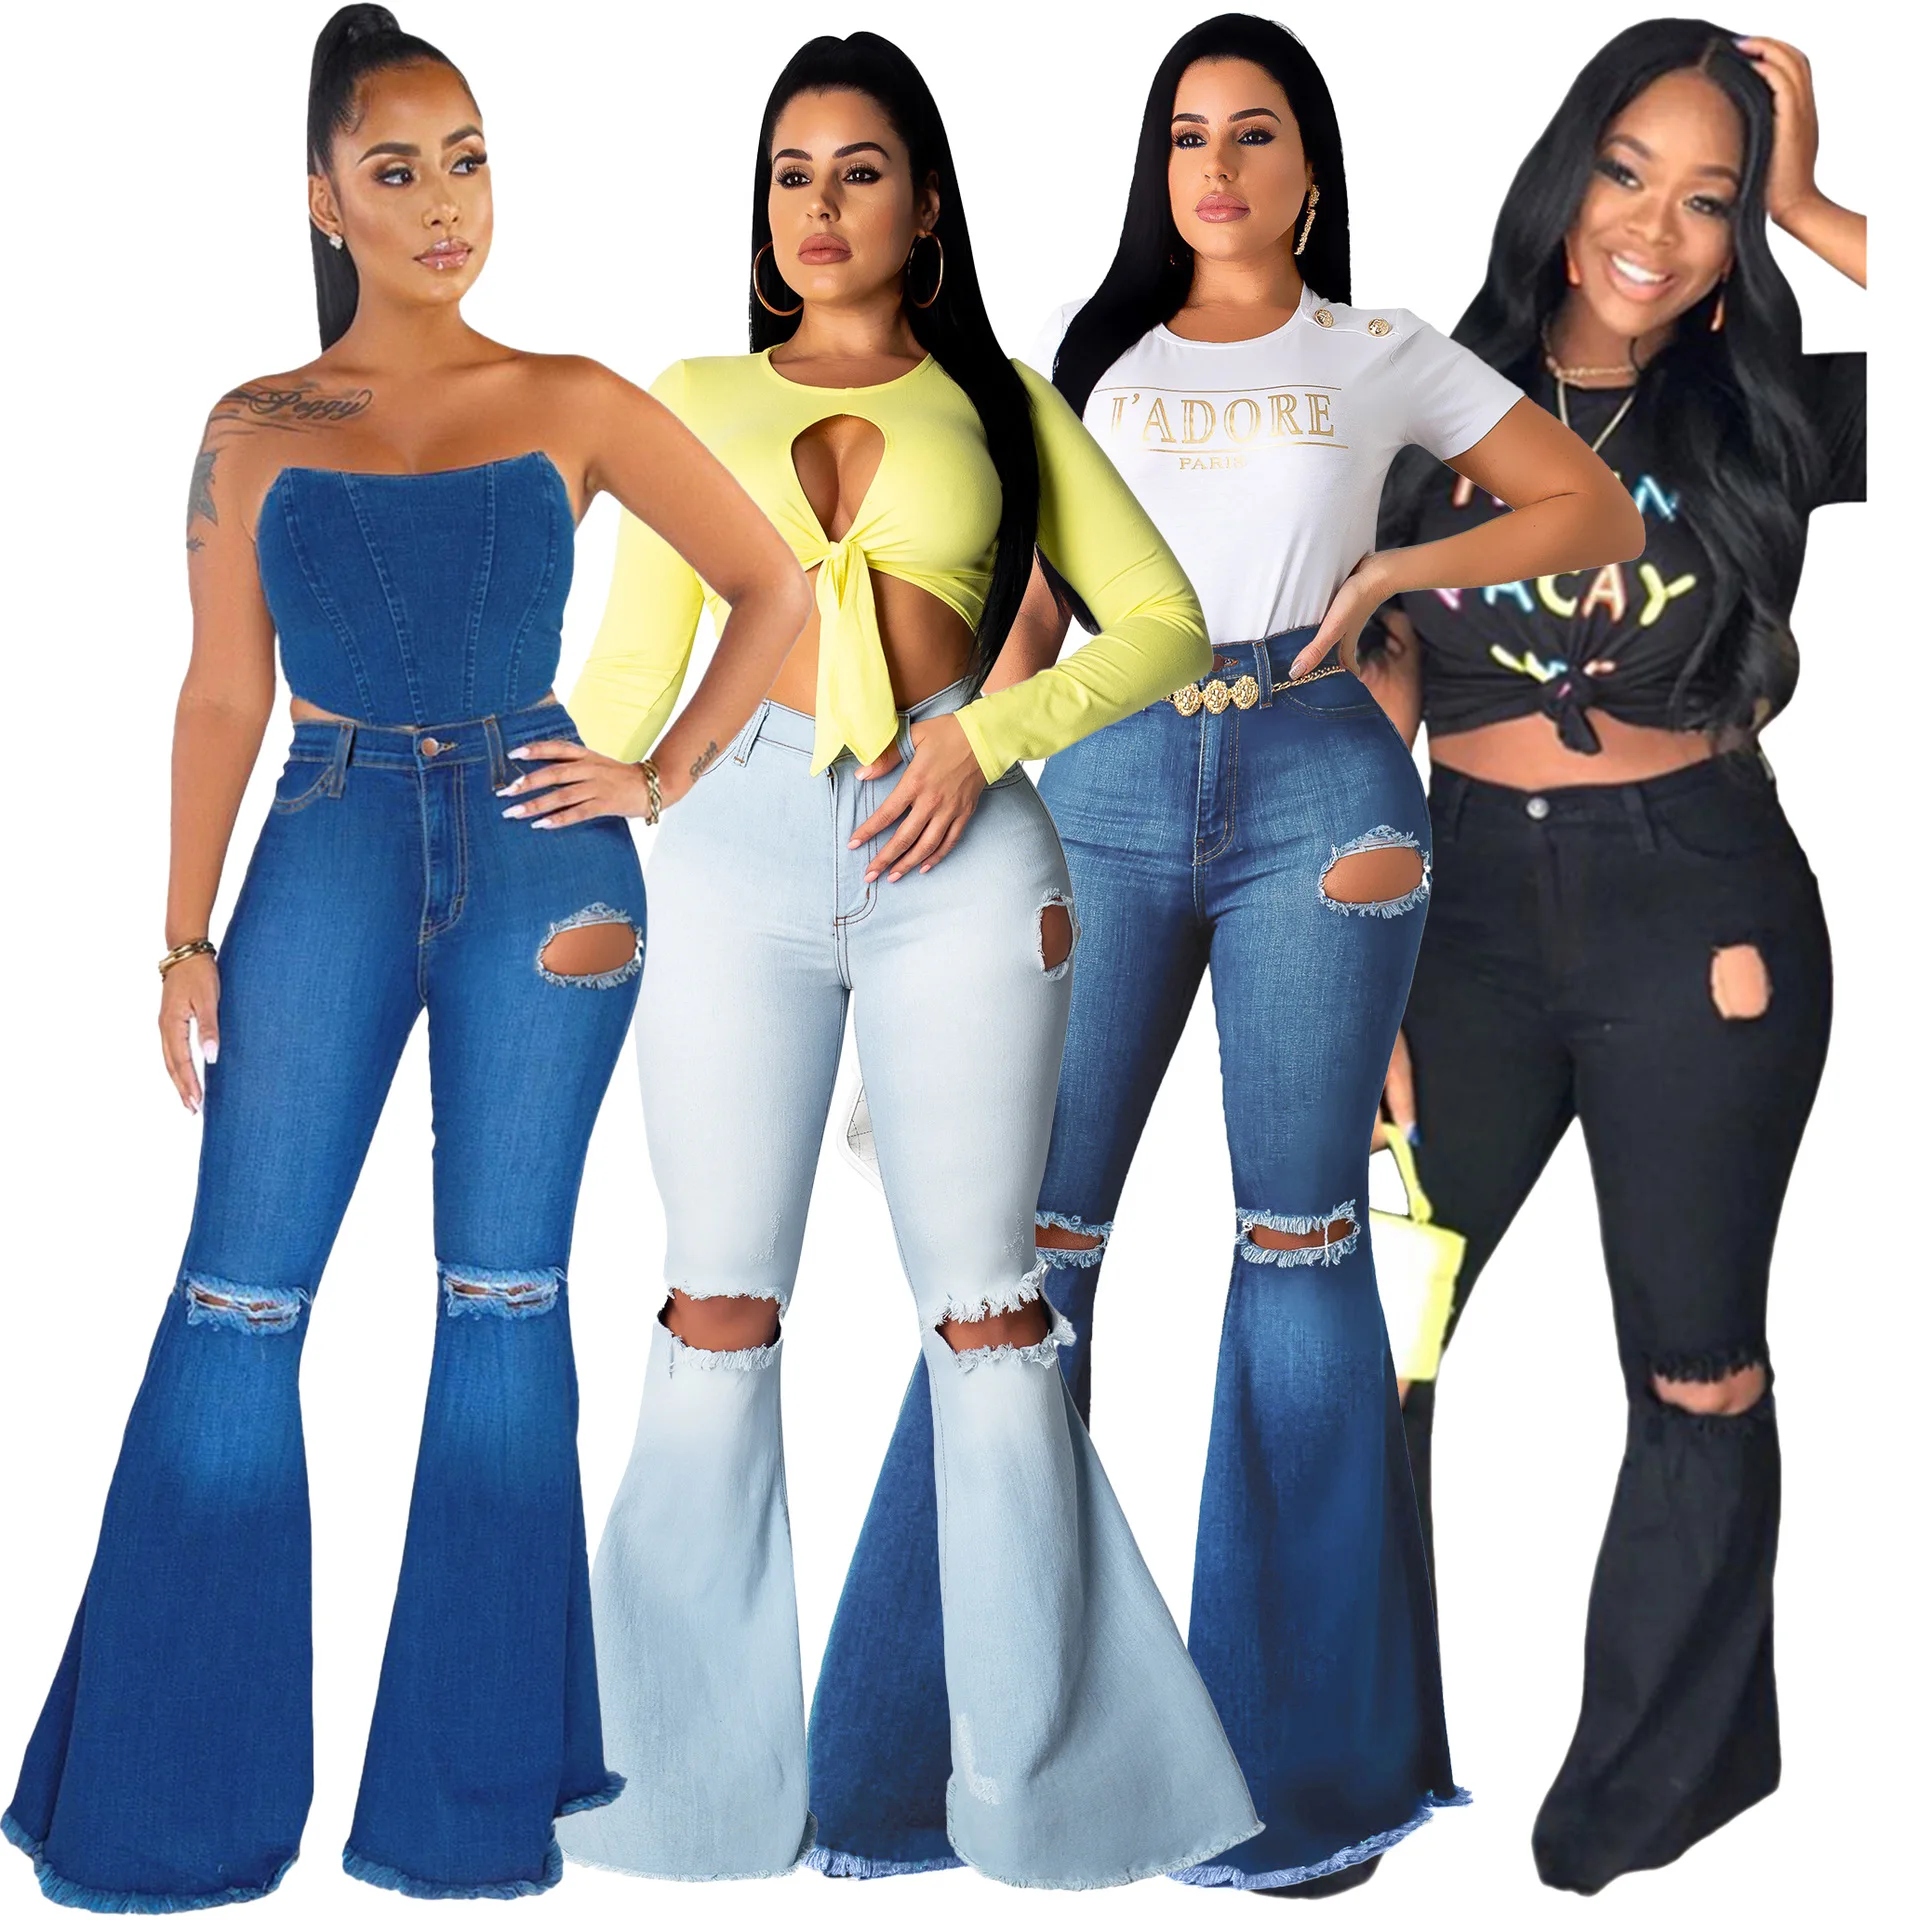 

New Arrivals Distressed Stretchy Blue Jean Pants For Women 2021 Flares High Waist Plus Size Jeans